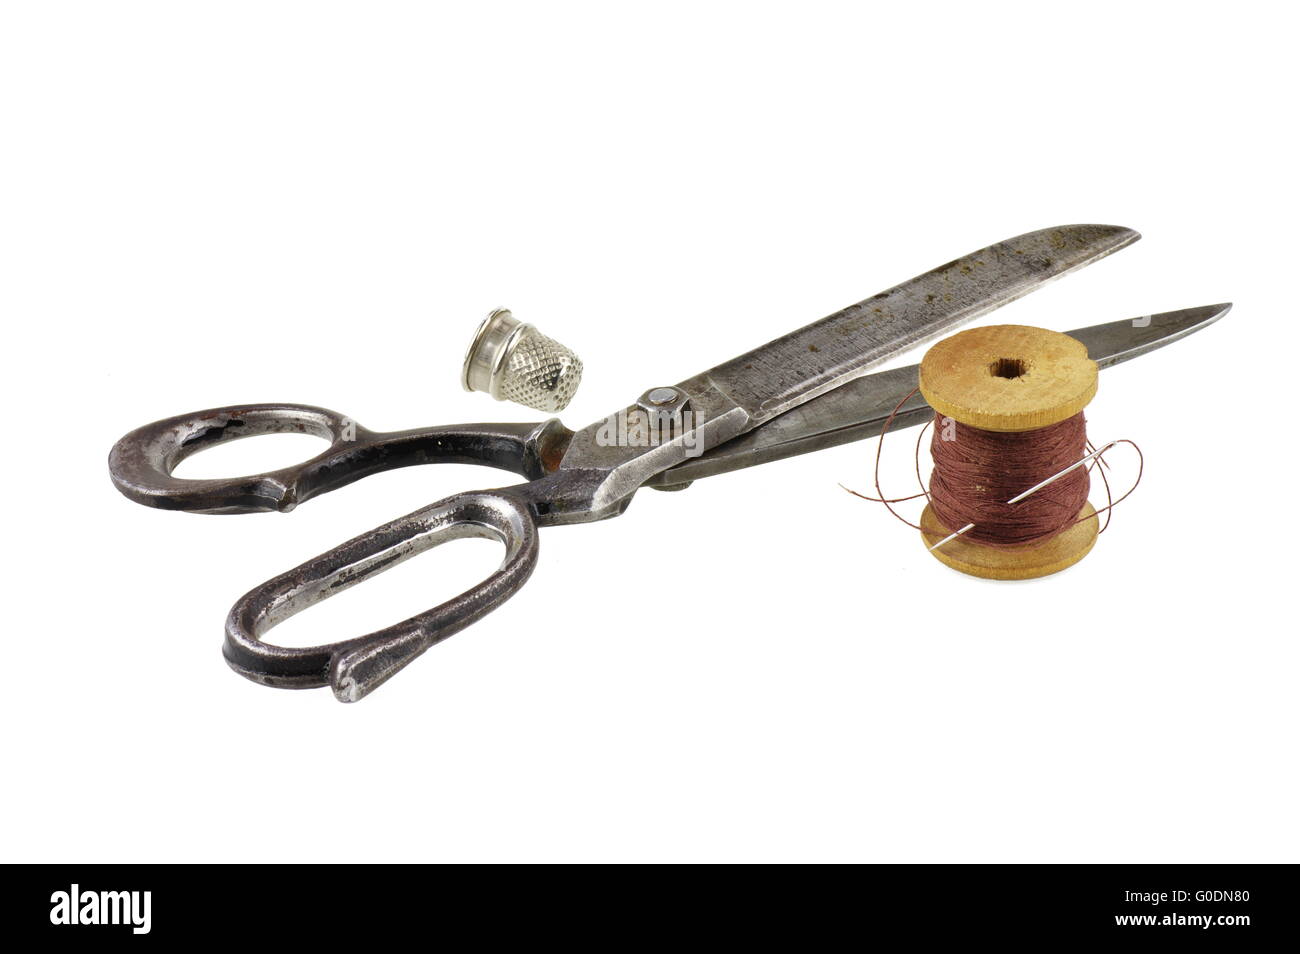 Big old garment shears, wooden spool of thread with a needle and a thimble. On a white background, isolated. Stock Photo